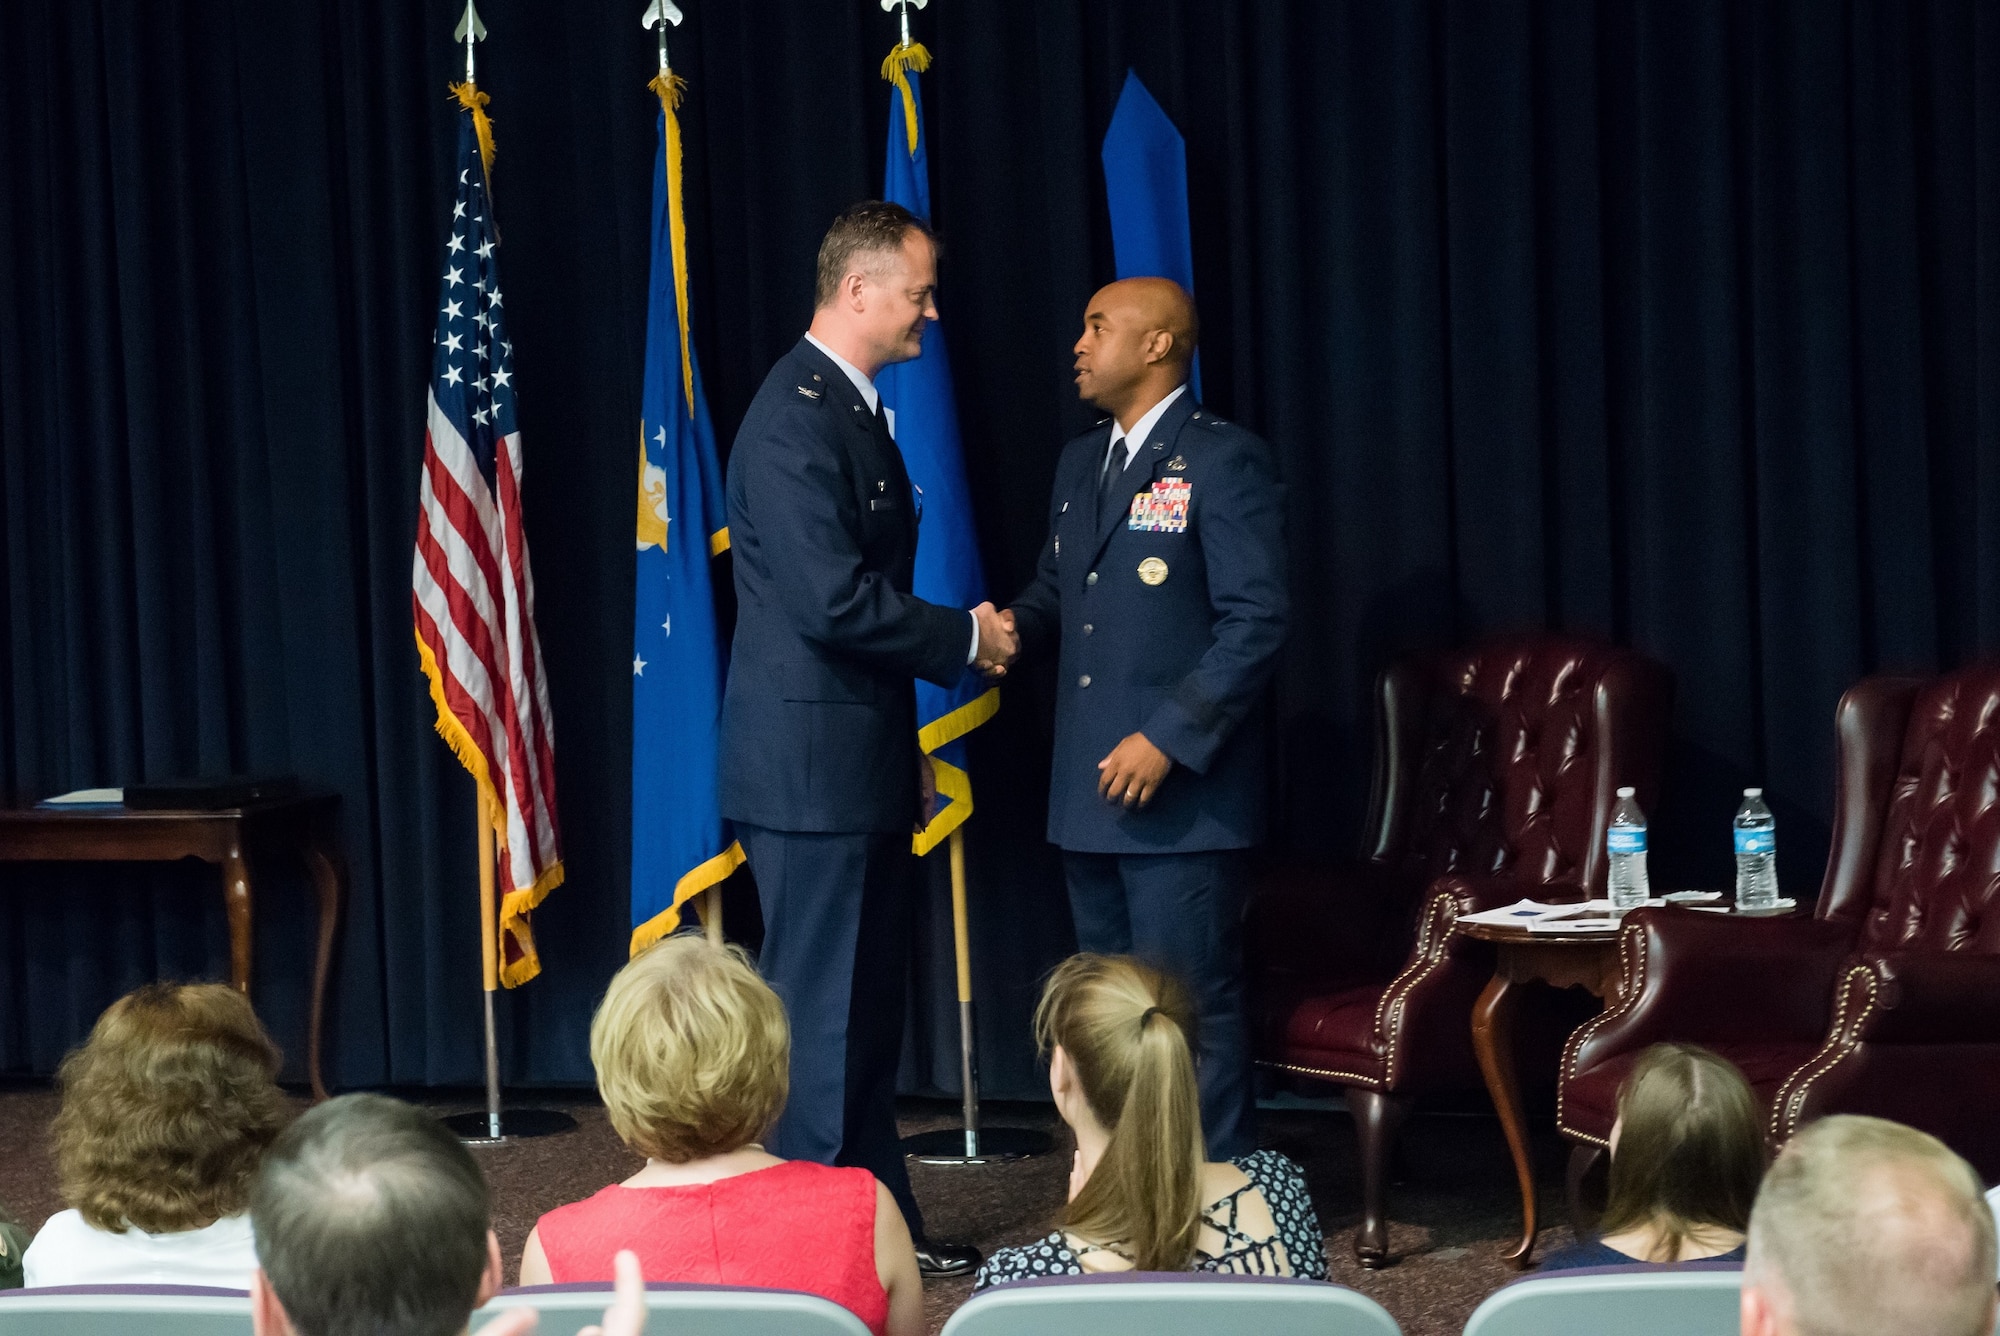 Col. Steven Cabosky, Air Advisor Academy commandant, shakes hands with Brig. Gen. Trent Edwards, 37th Training Wing commander, Joint Base San Antonio-Lackland, Texas, after providing closing comments during the inactivation ceremony for the Air Advisor Academy at Joint Base McGuire-Dix-Lakehurst, N.J., July 10, 2015. The U.S. Air Force Expeditionary Center officially assumed the responsibility of being the Air Force's sole provider of training for general purpose force Air Advisors. (U.S. Air Force photo by Russ Meseroll/Released)